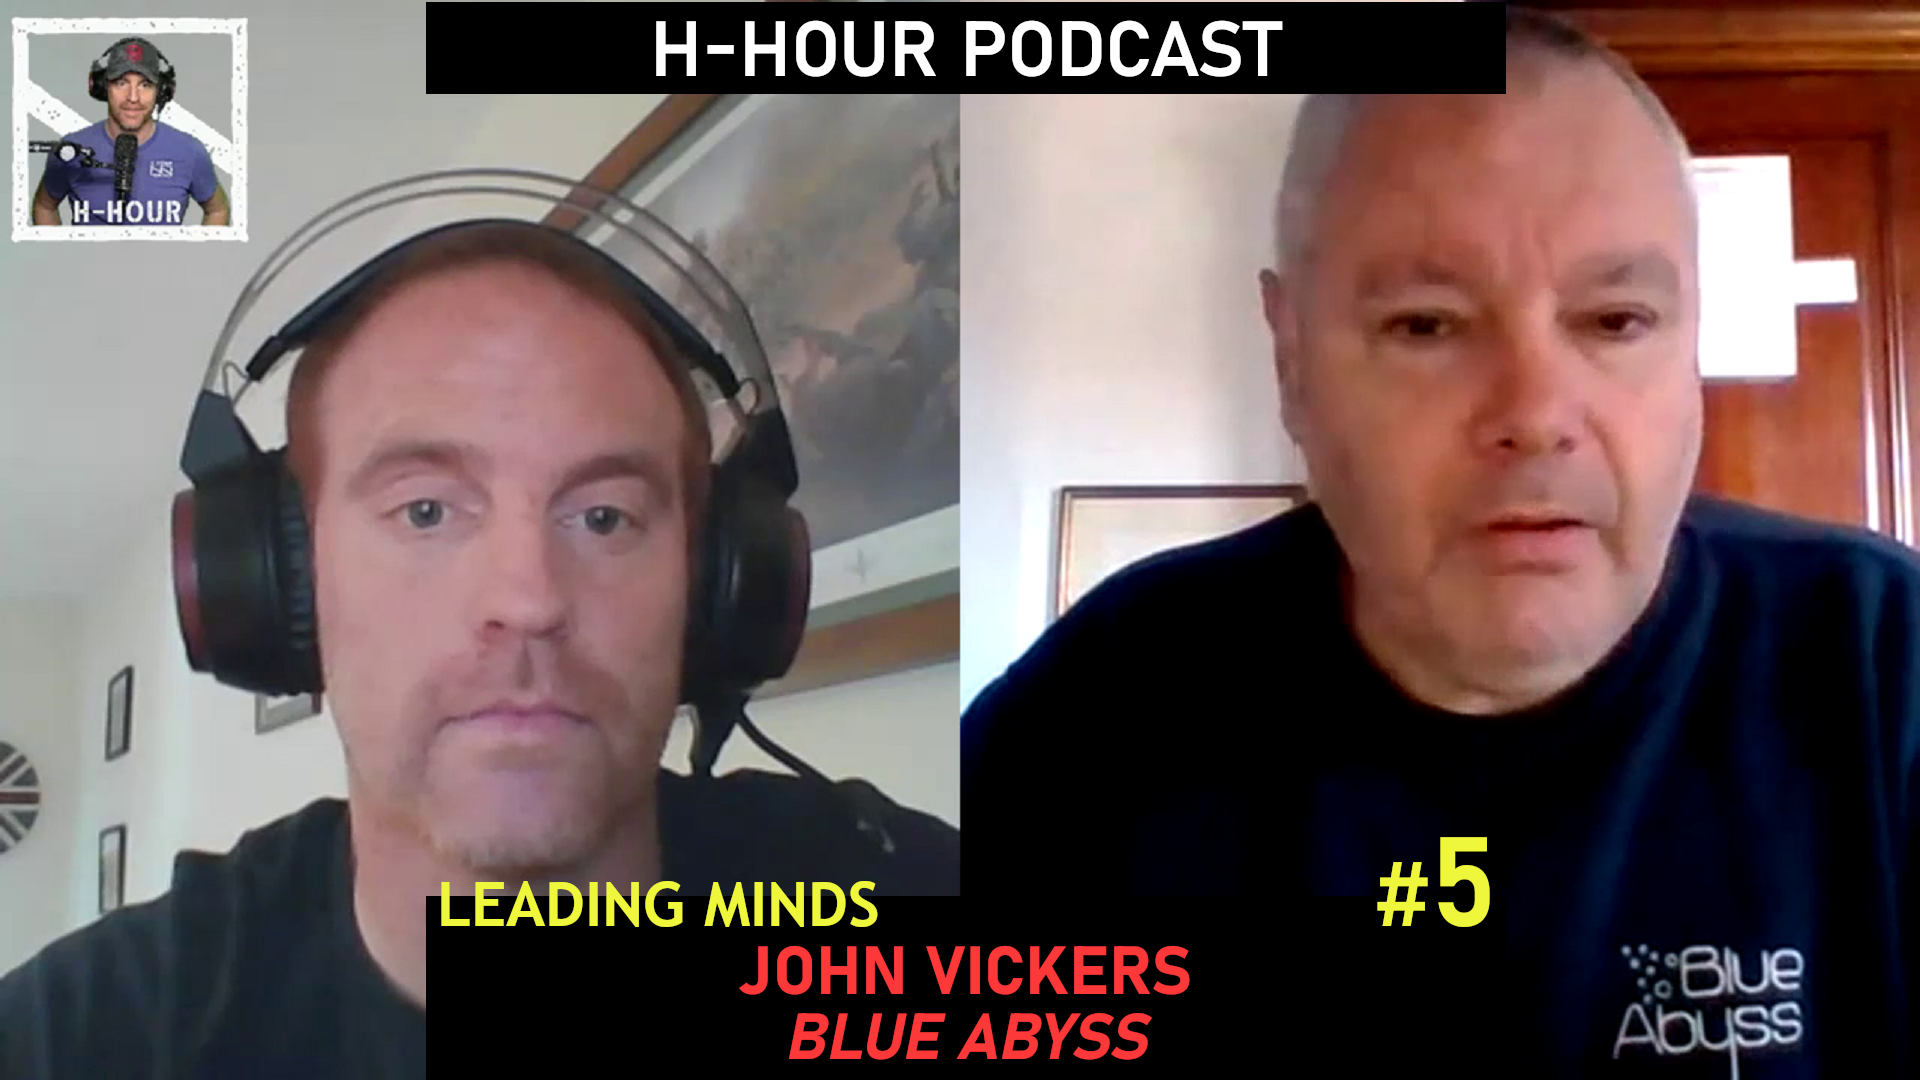 john vickers blue abyss on h-hour's leading minds series